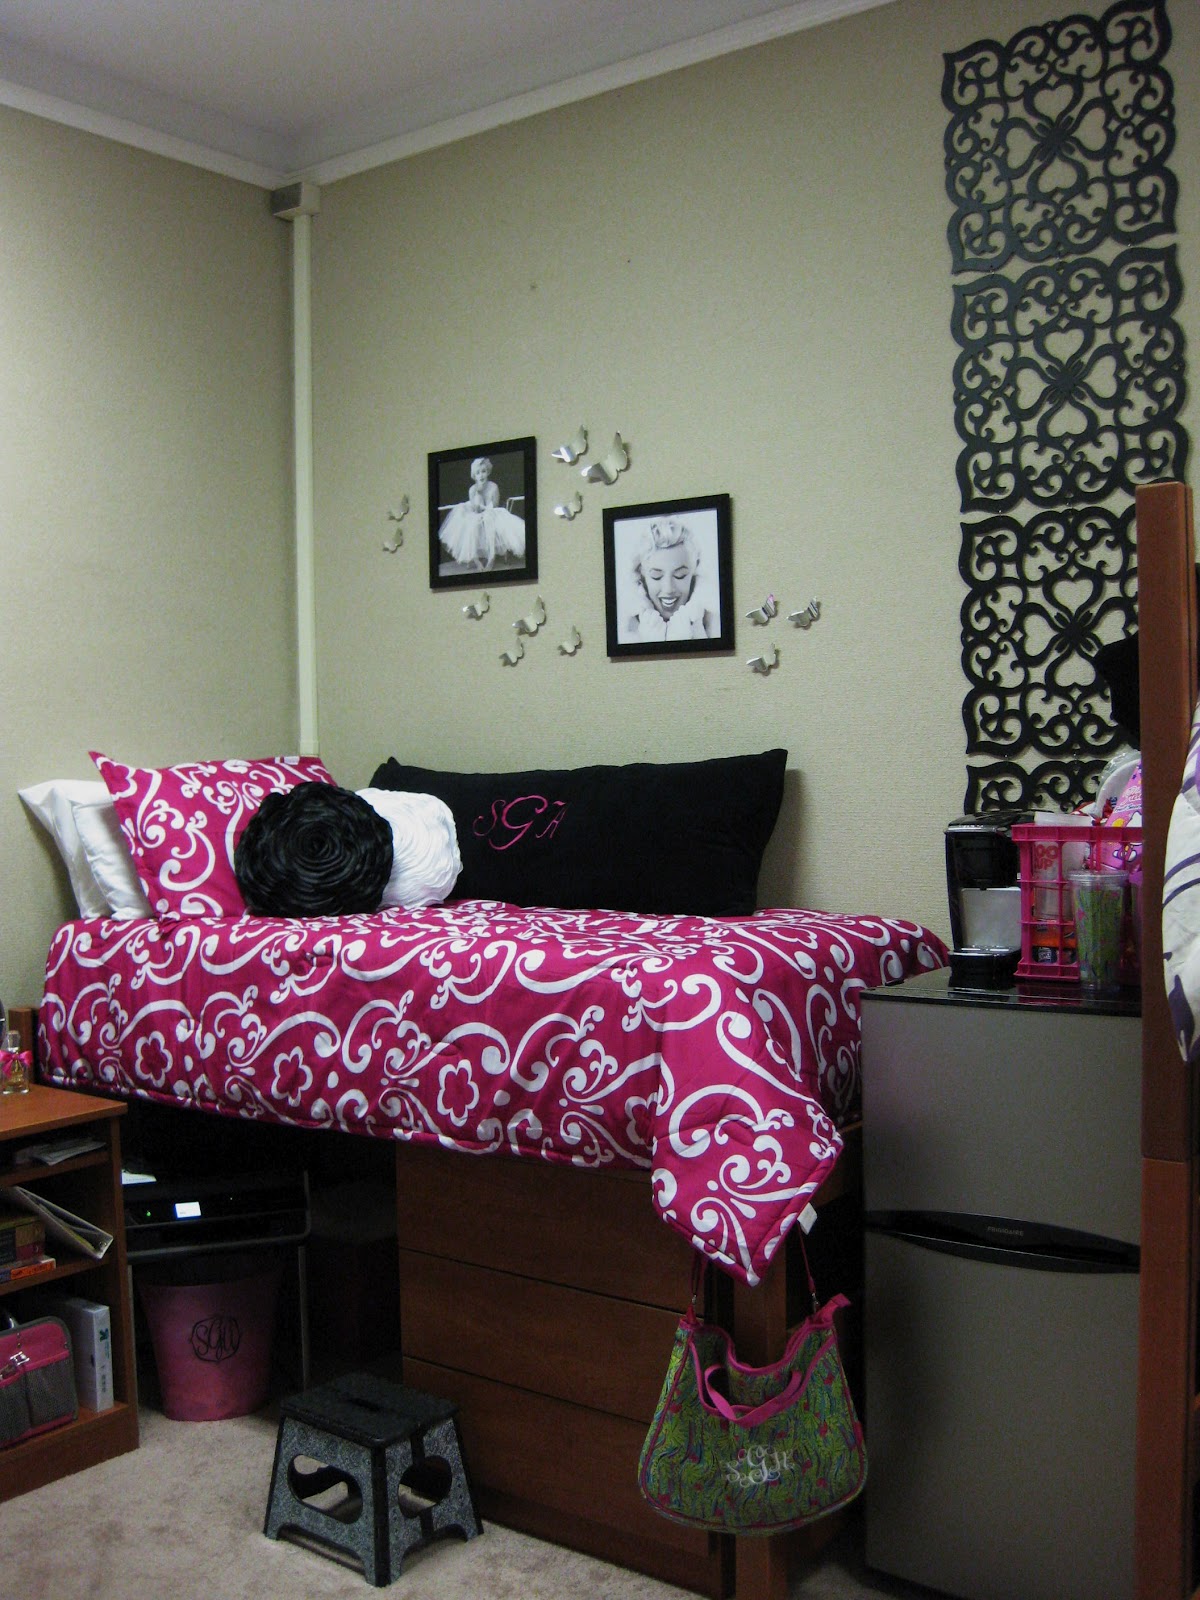 Ramblings of a Southern Girl: Girlie Dorm Decorating